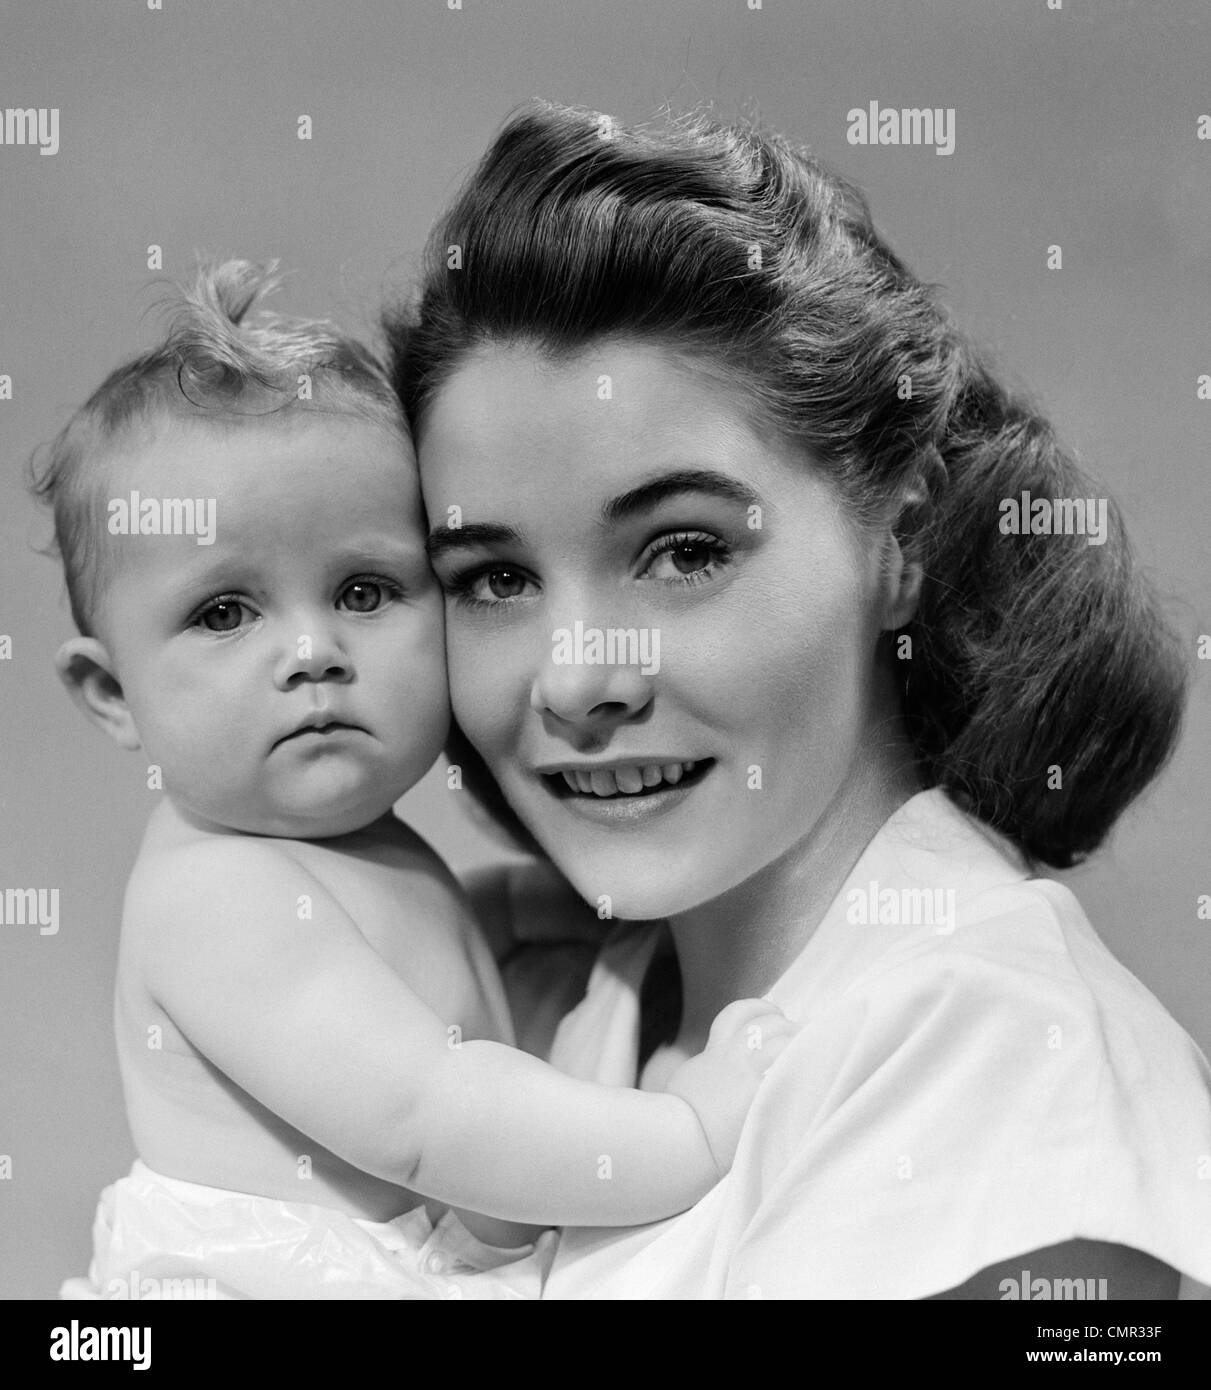 1940s 1950s PORTRAIT OF MOTHER HUGGING BABY LOOKING AT CAMERA Stock Photo